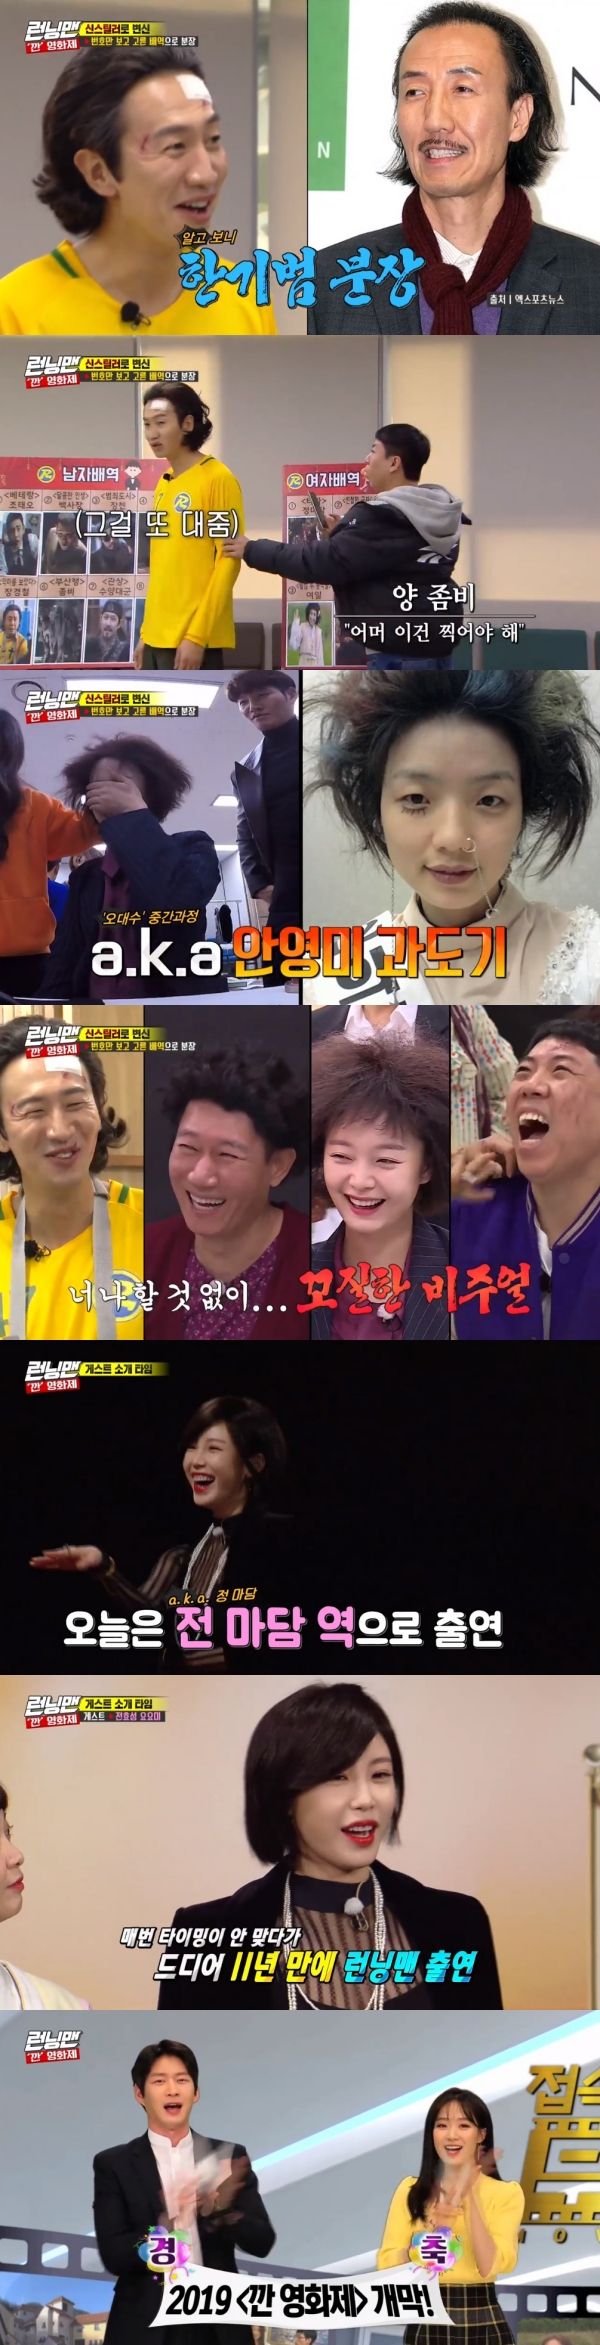 Running Man opens Kan Film FestivalOn SBS Running Man broadcasted on the 29th, the members dressed up as the cast in the movie for the Kan Film Festival, and the guests Jun Hyoseong, Yoyomi, Heo Kyung-hwan and Kang Tae-oh were included.On this day, Lee Kwang-soo dressed up as Jang Kyung-cheol in <I saw the devil>.Haha laughed at Lee Kwang-soos curls and said, It looks like Han Ki-bum.Haha dressed up as a nugget in Tazza: The High Rollers, and the members laughed, saying, Its not a nugget, its a baby, and Its a lightning hit and its turned into a child.Guests Jun Hyoseong and Yoyomi appeared in the form of , Madame Chung,  Yeoil, respectively.Jun Hyoseong said, I have been debuting for 11 years and my first appearance. I am living hard.Yoyomi introduced Yoyomida, a song fairy, and Yoo Jae-Suk added, Hye Eun resembles a lot of seniors.Kang Tae-oh and Heo Kyung-hwan, who appeared, were divided into Baek, president of the Veteran, and Cho Tae-oh. Heo Kyung-hwan said, Singer.Its true, she said, showing her 40-five choreography.Guests and members made a game to reveal the director Identity in the Kan Film Festival celebration.Jun Hyoseong, who participated in the game, said, It is more of a mess than I saw on the air, and Lee Kwang-soo said, Today is a good day.Behind this, Yoo Jae-Suk jokingly said to Heo Kyung-hwan, Its a warning; Im not active in the program.Kim Jong Kook also said, If you come out with three warnings, I will go home. Heo Kyung-hwan said, I came out a few times and cut it in front of me.I will try hard, he said, laughing at the members.